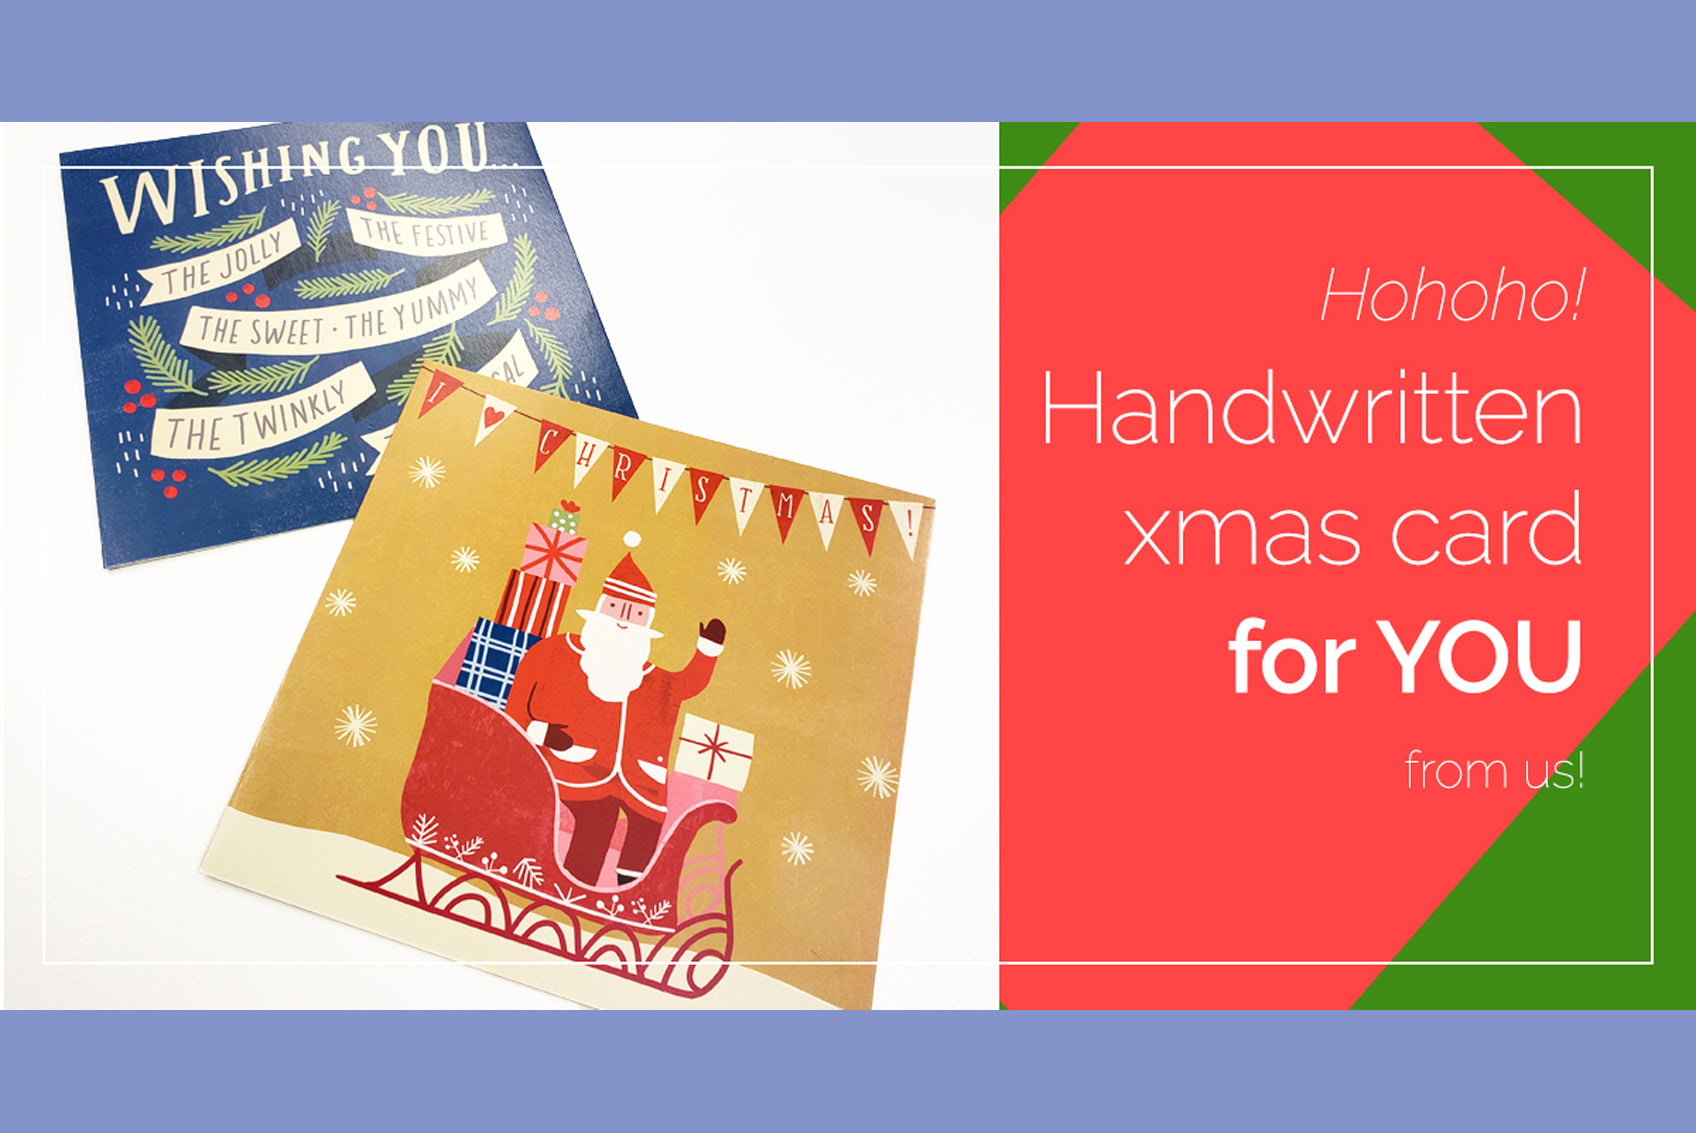 Want to Receive Handwritten Xmas Cards?